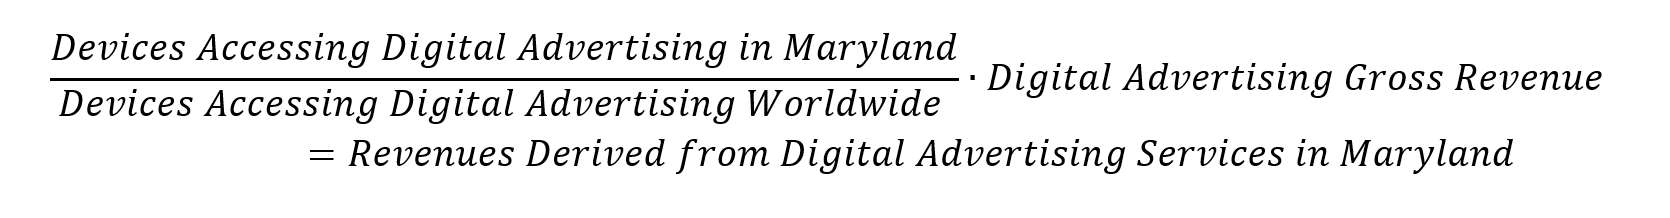 Learn more about the 2021 Maryland digital advertising tax regulations, revenue derived from digital advertising services in Maryland